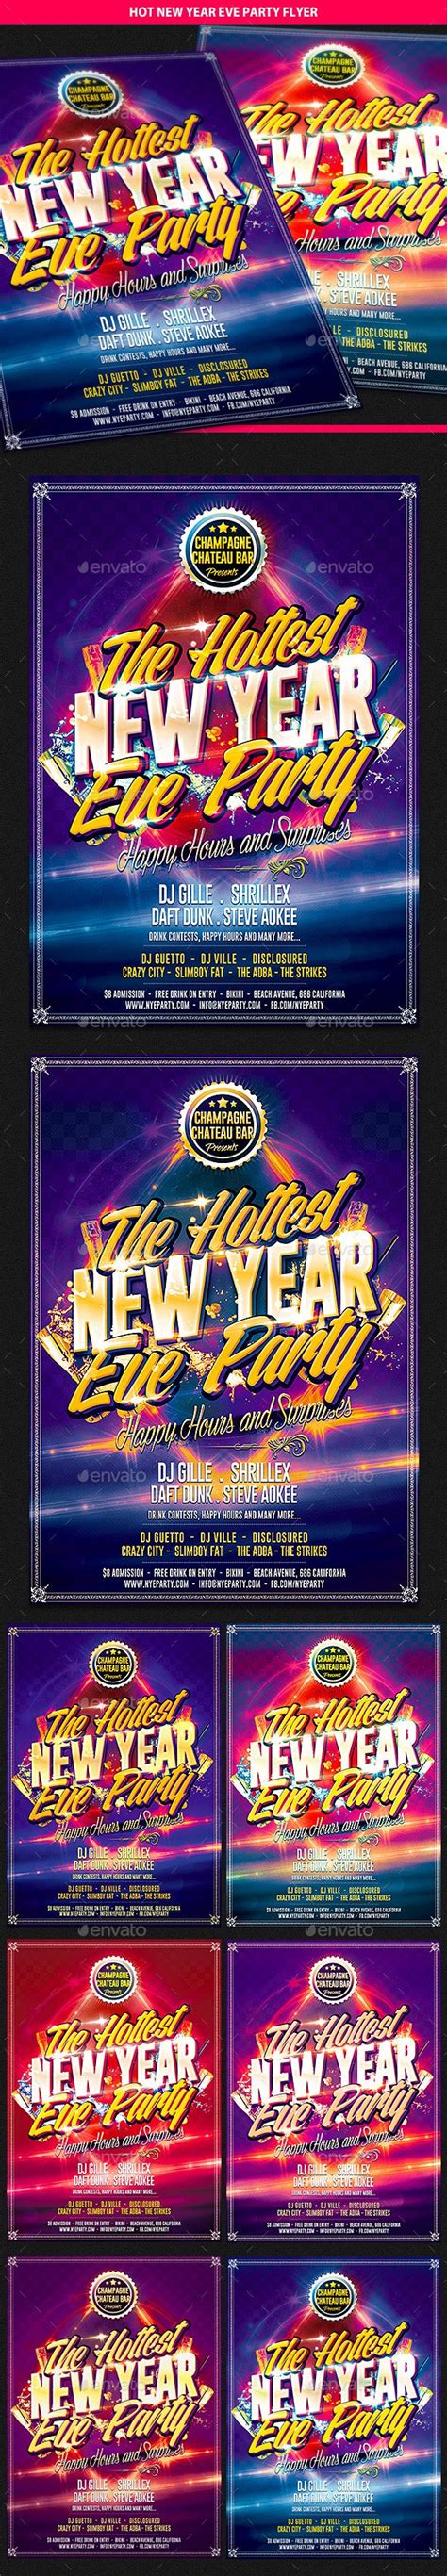 hot new year eve party flyer print templates graphicriver